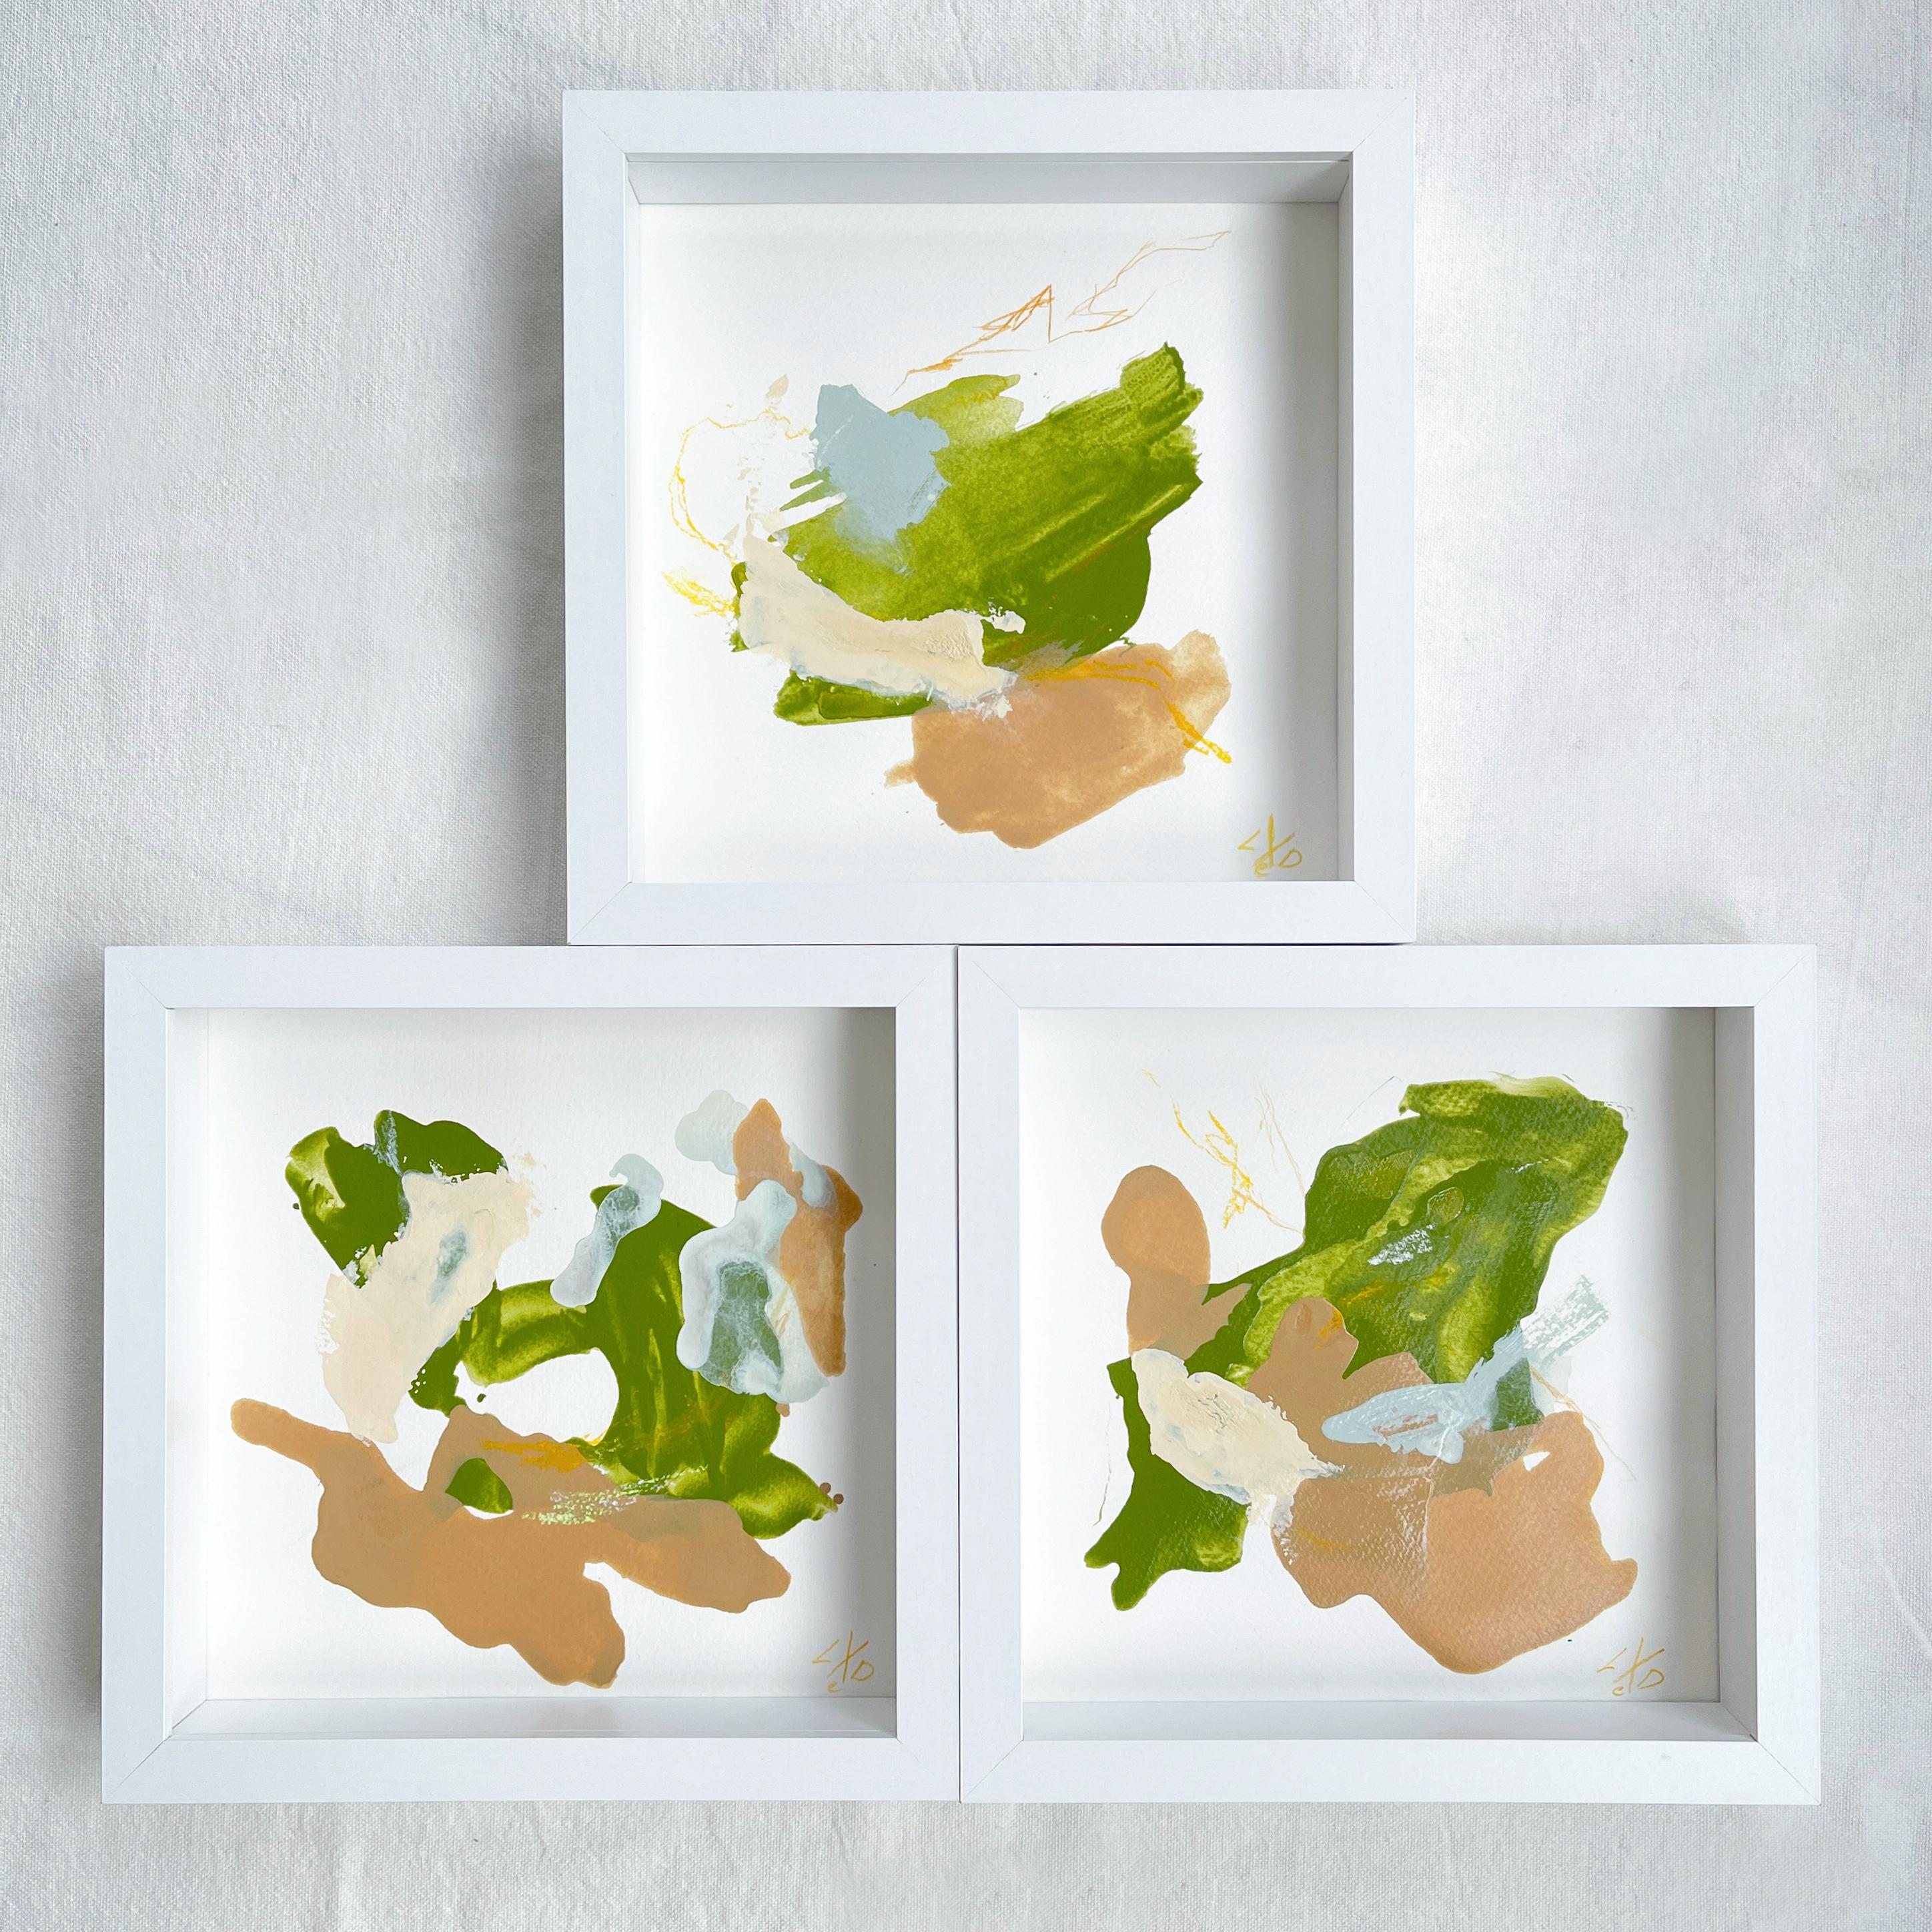 Triptych "Fundamentality" abstract, green, brown, beige, miniature